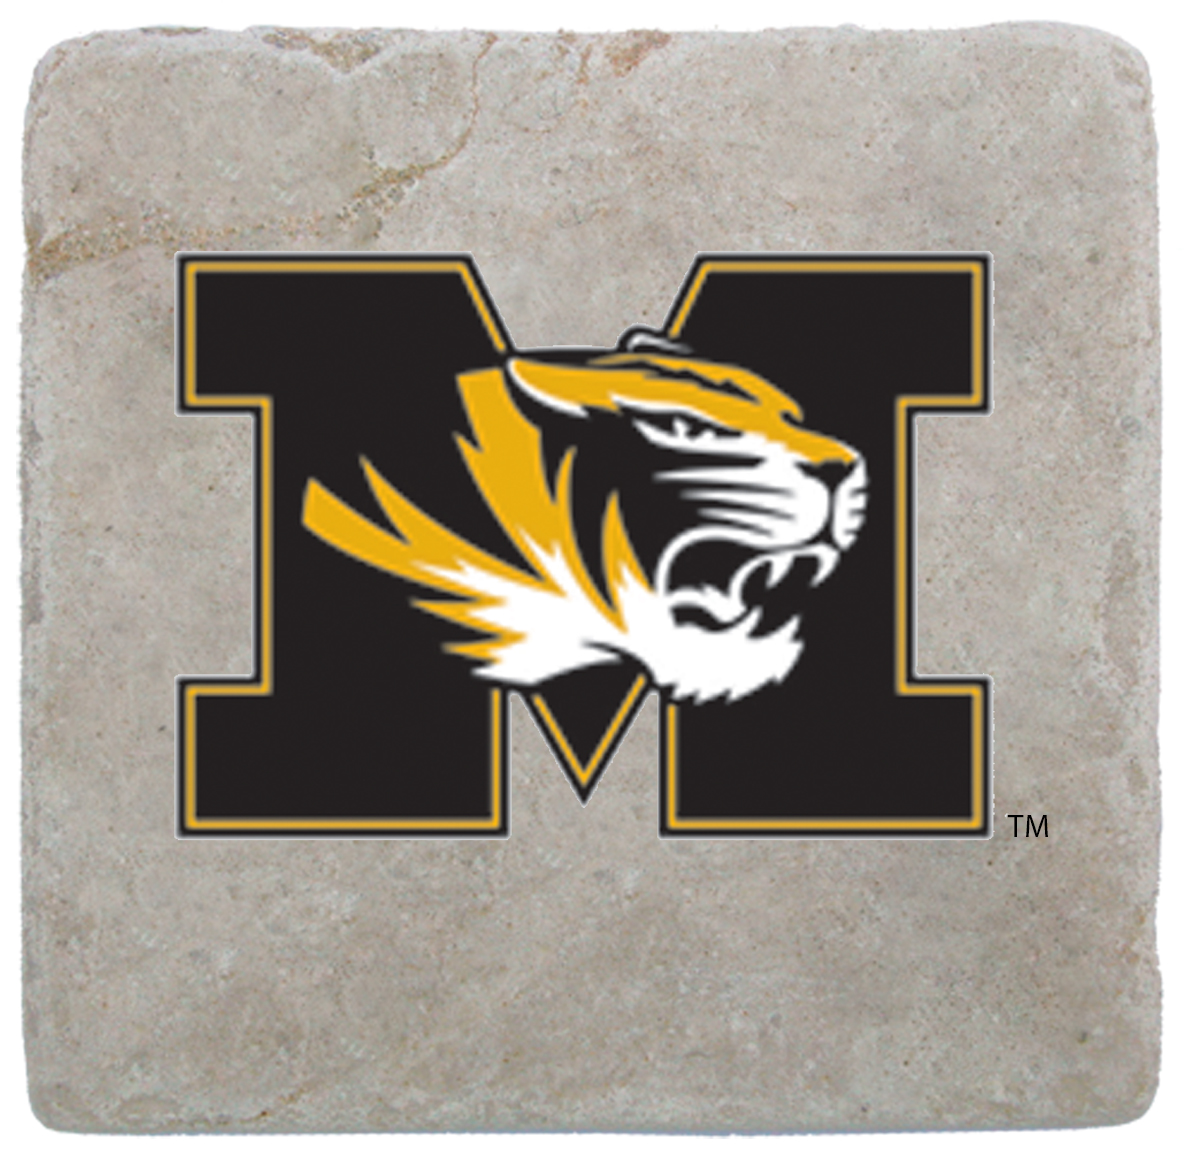 Marble Coaster with University of Missouri Tiger